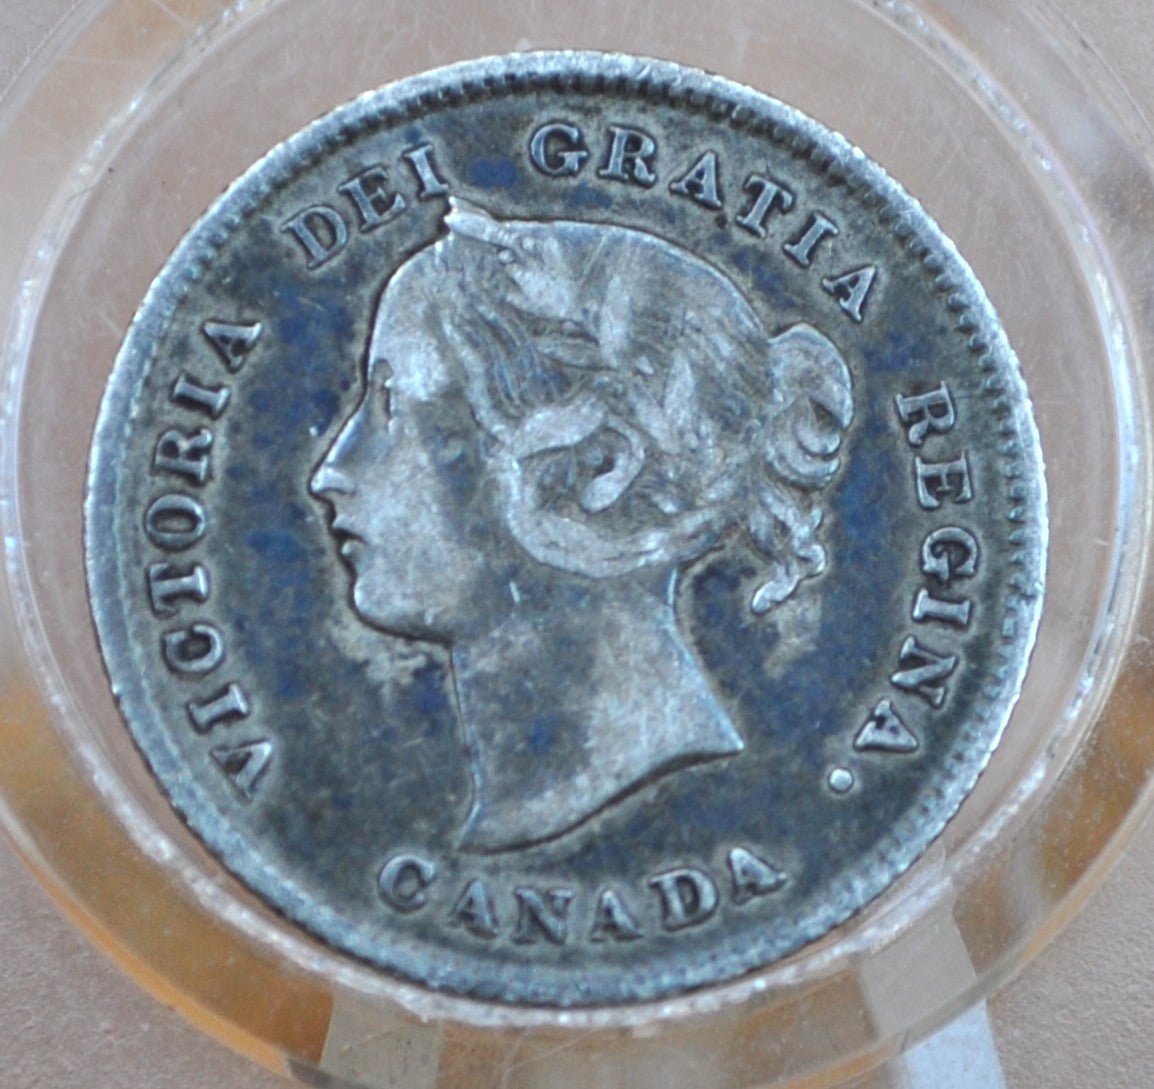 1870 Canadian Silver 5 Cent Coin - VF+ (Very Fine) Grade - Queen Victoria Canada 5 Cent Sterling Silver 1870